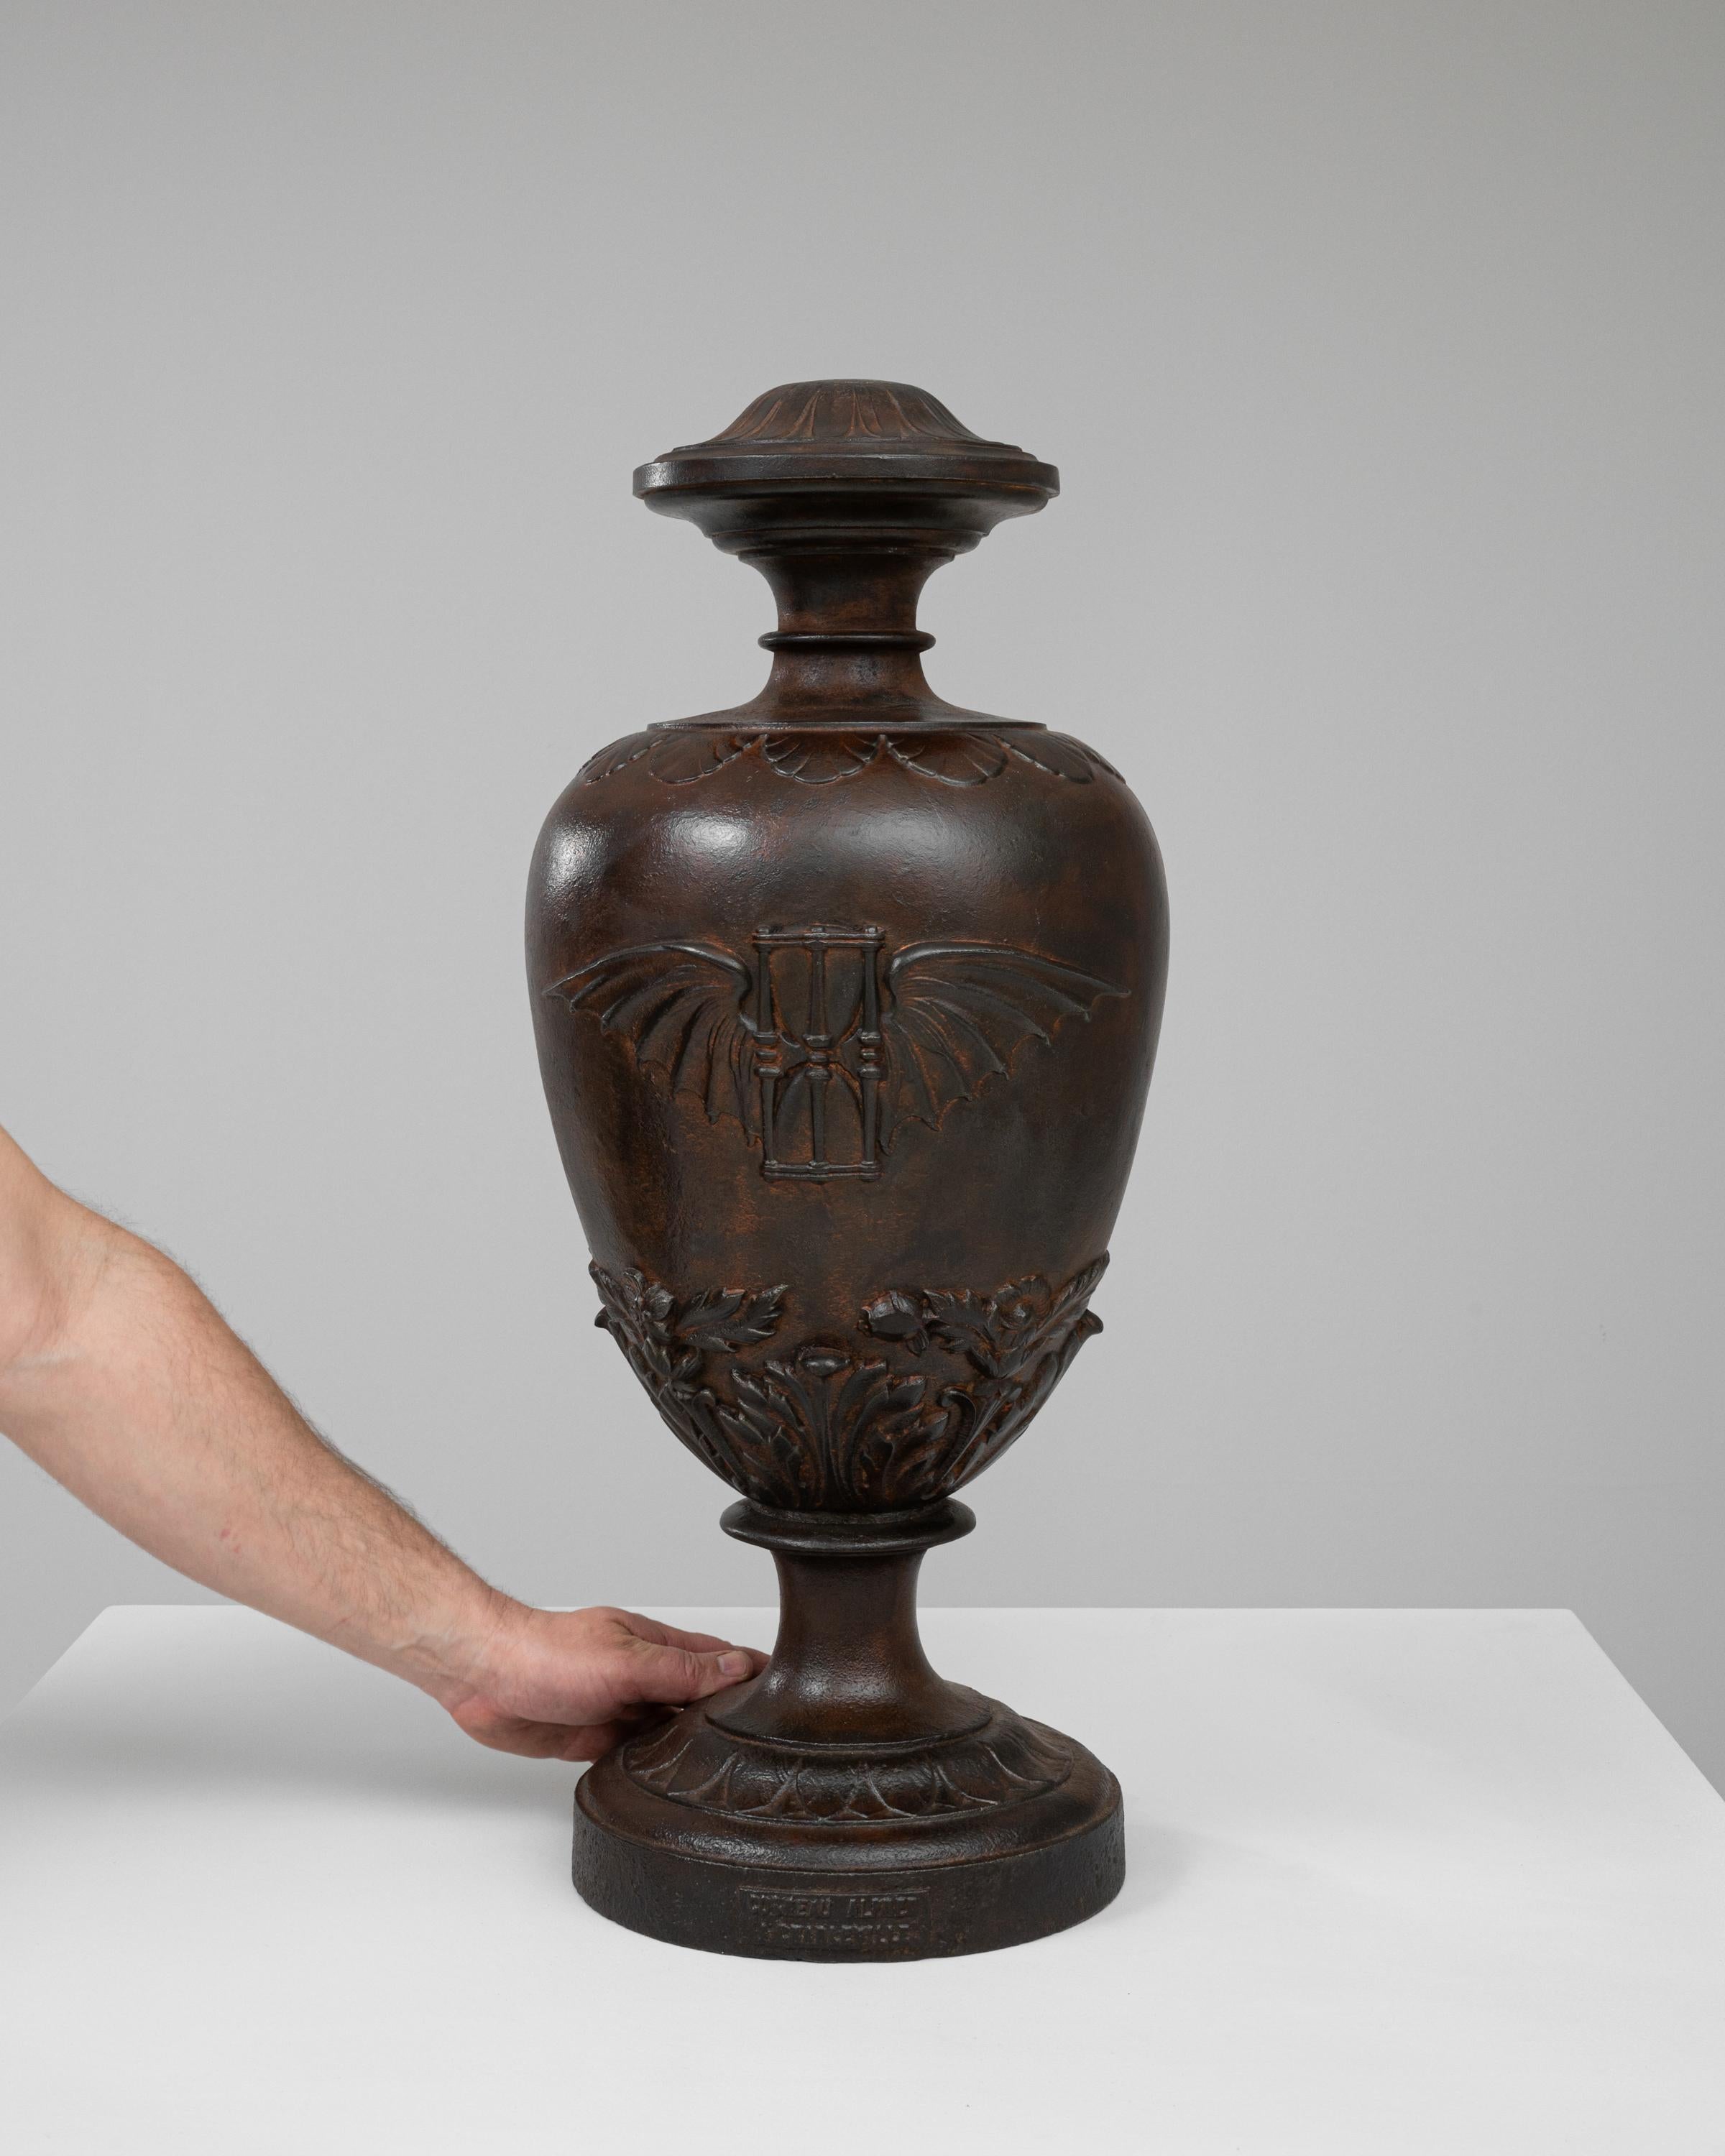 Unveil the grandeur of the 1900s with this authentic French cast iron urn, a classic decorative element to enchant any garden or patio. This timeless piece stands out with its intricate relief work, showcasing opulent patterns and traditional motifs